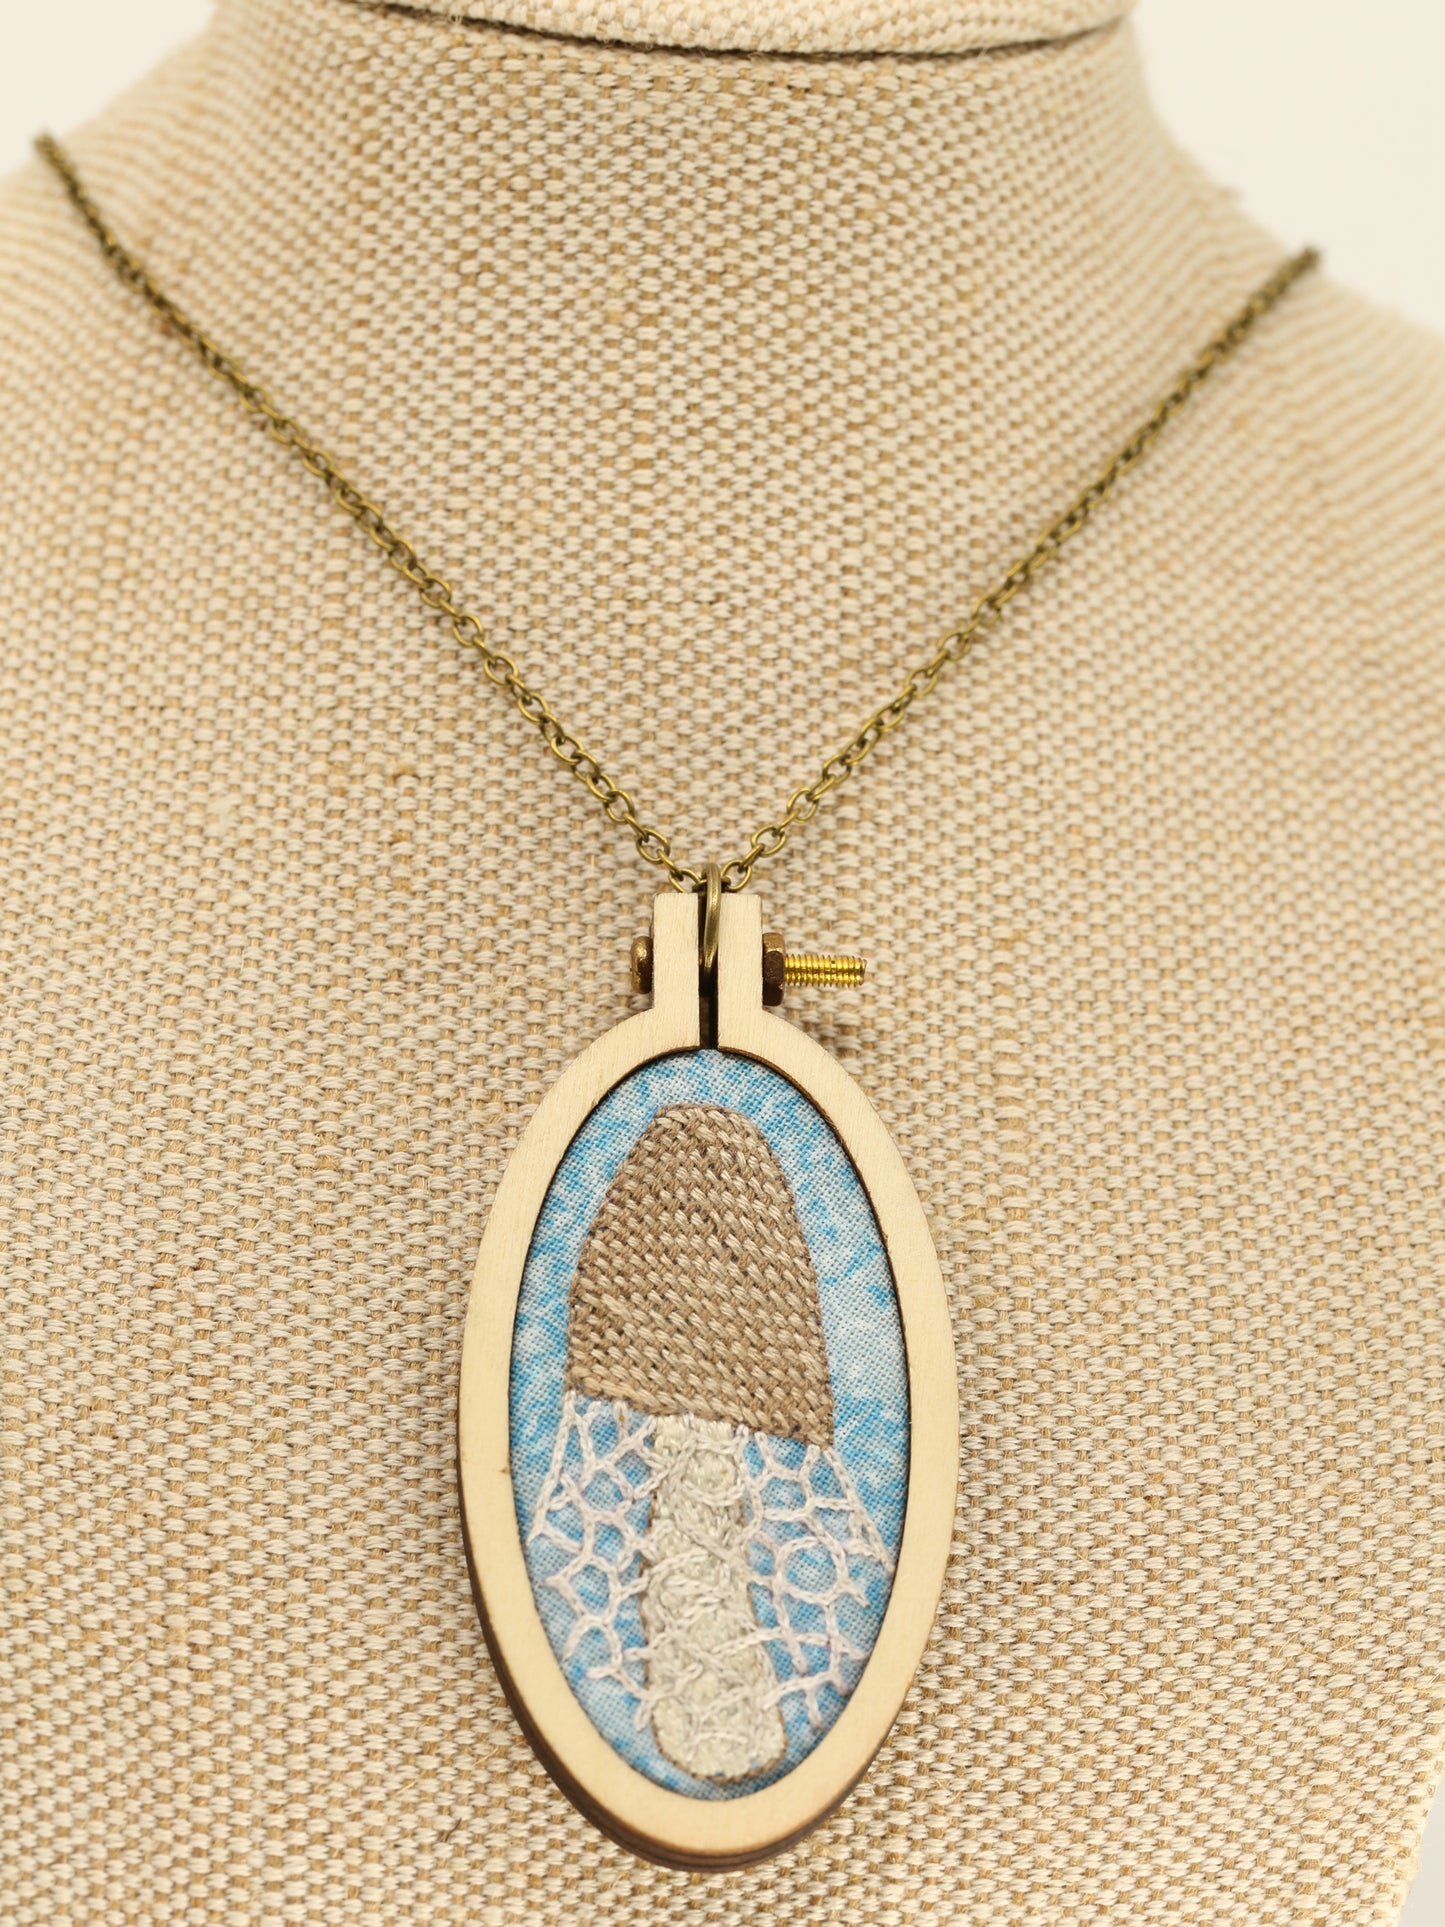 Stinkhorn in the Sky embroidered necklace